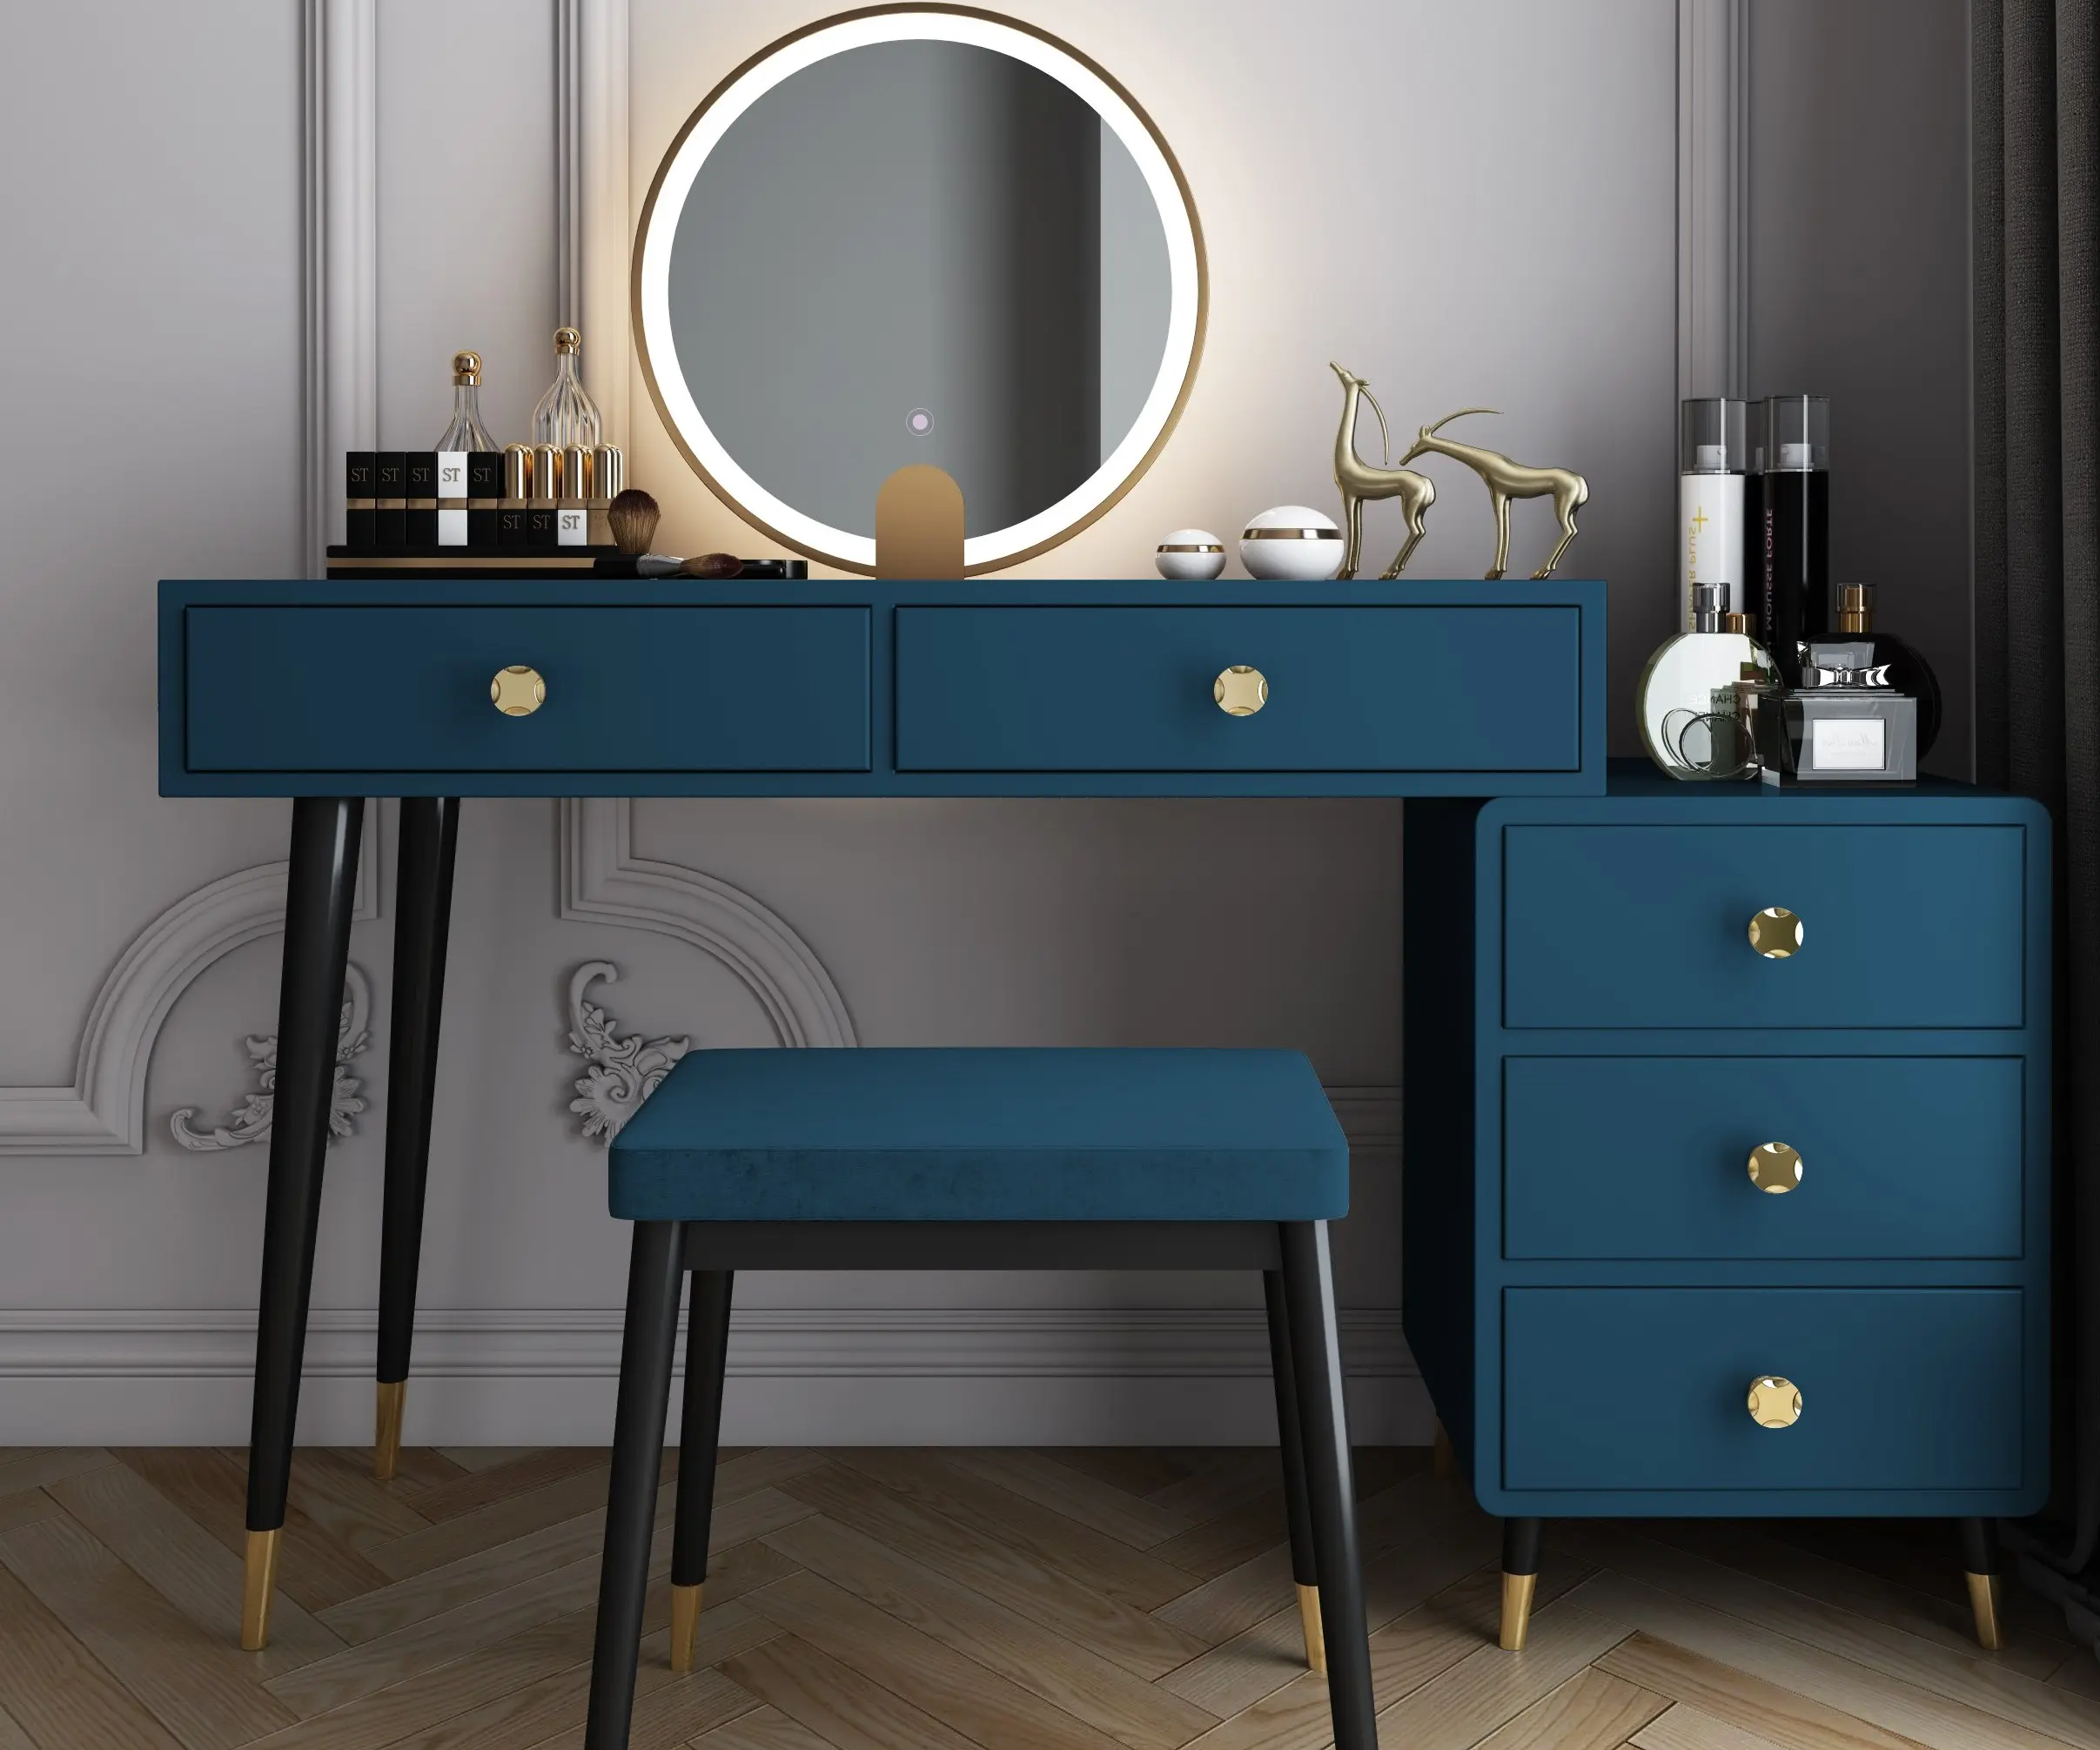 What color dresser is the most popular?